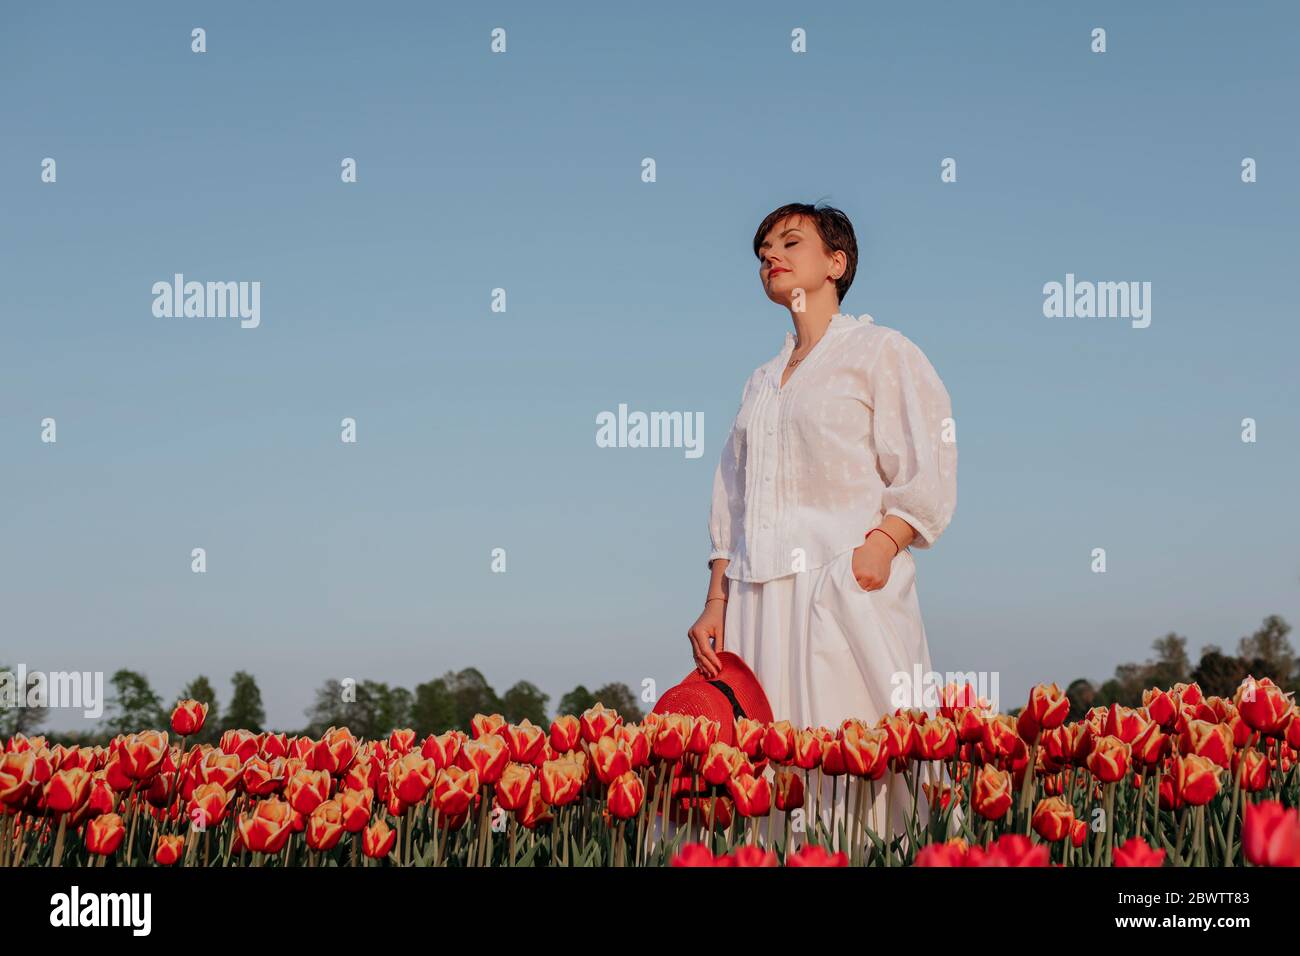 Portrait of woman with eyes closed  standing in tulip field Stock Photo